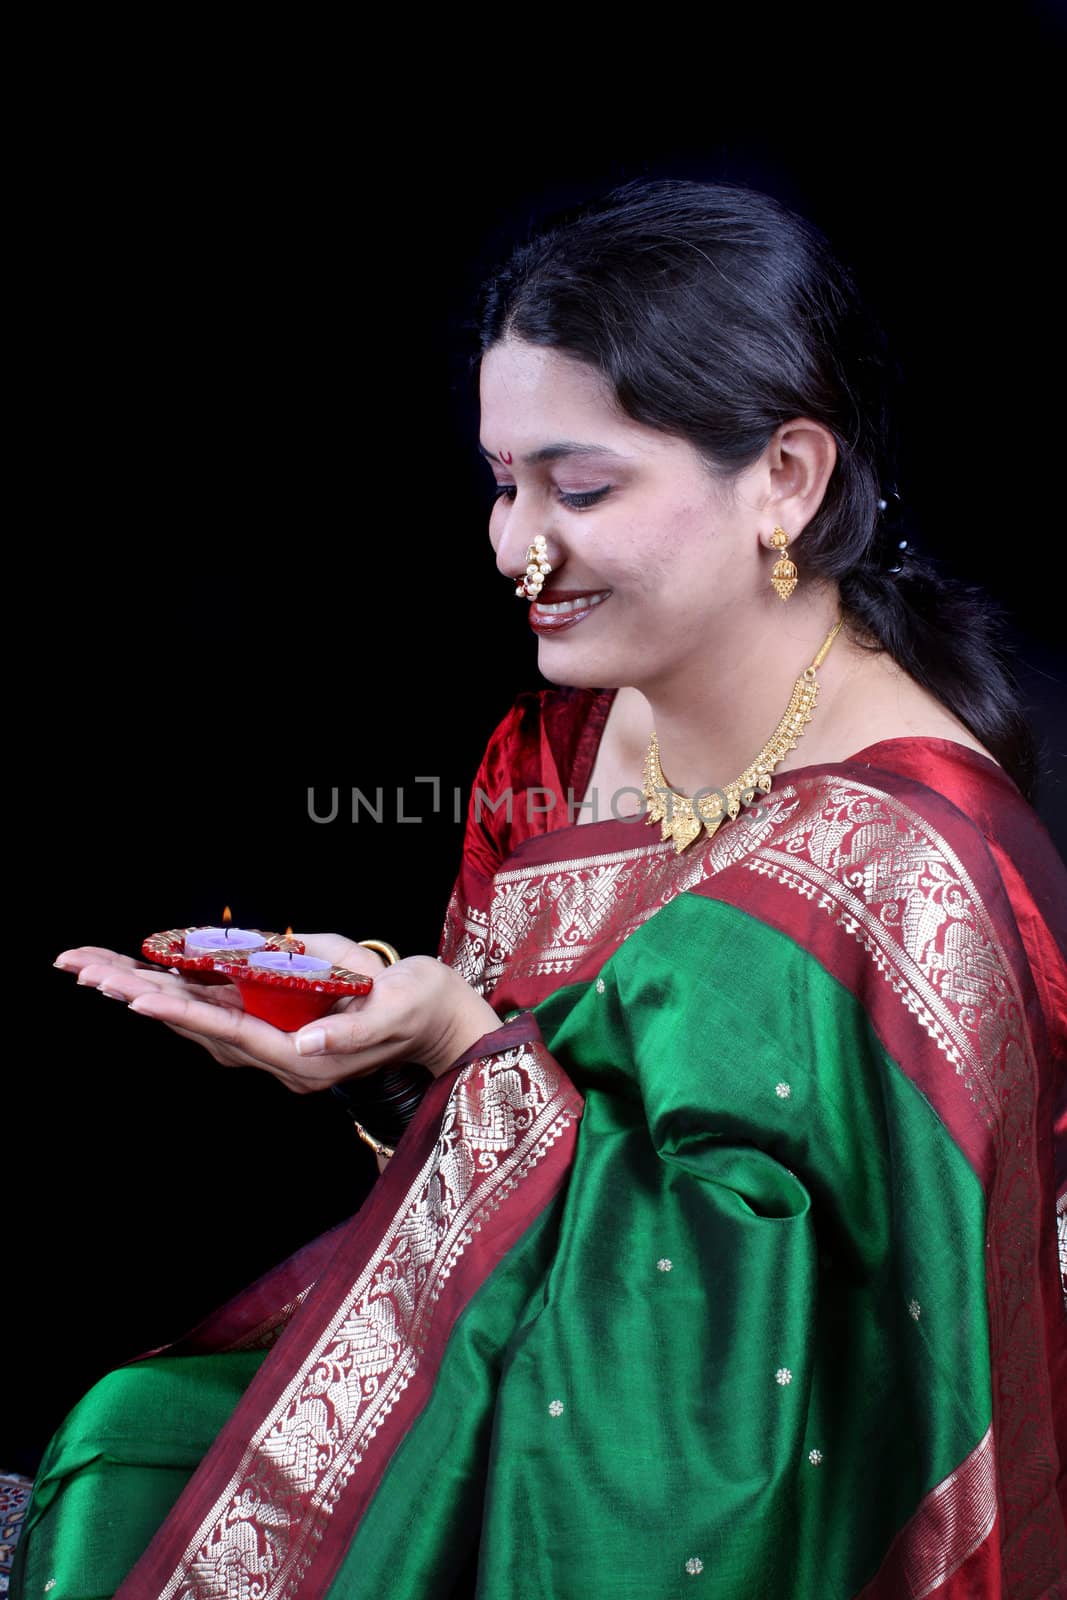 An Indian woman in a traditional green sari holding Oil-lamps on the occasion of Diwali festival, on black studio background.